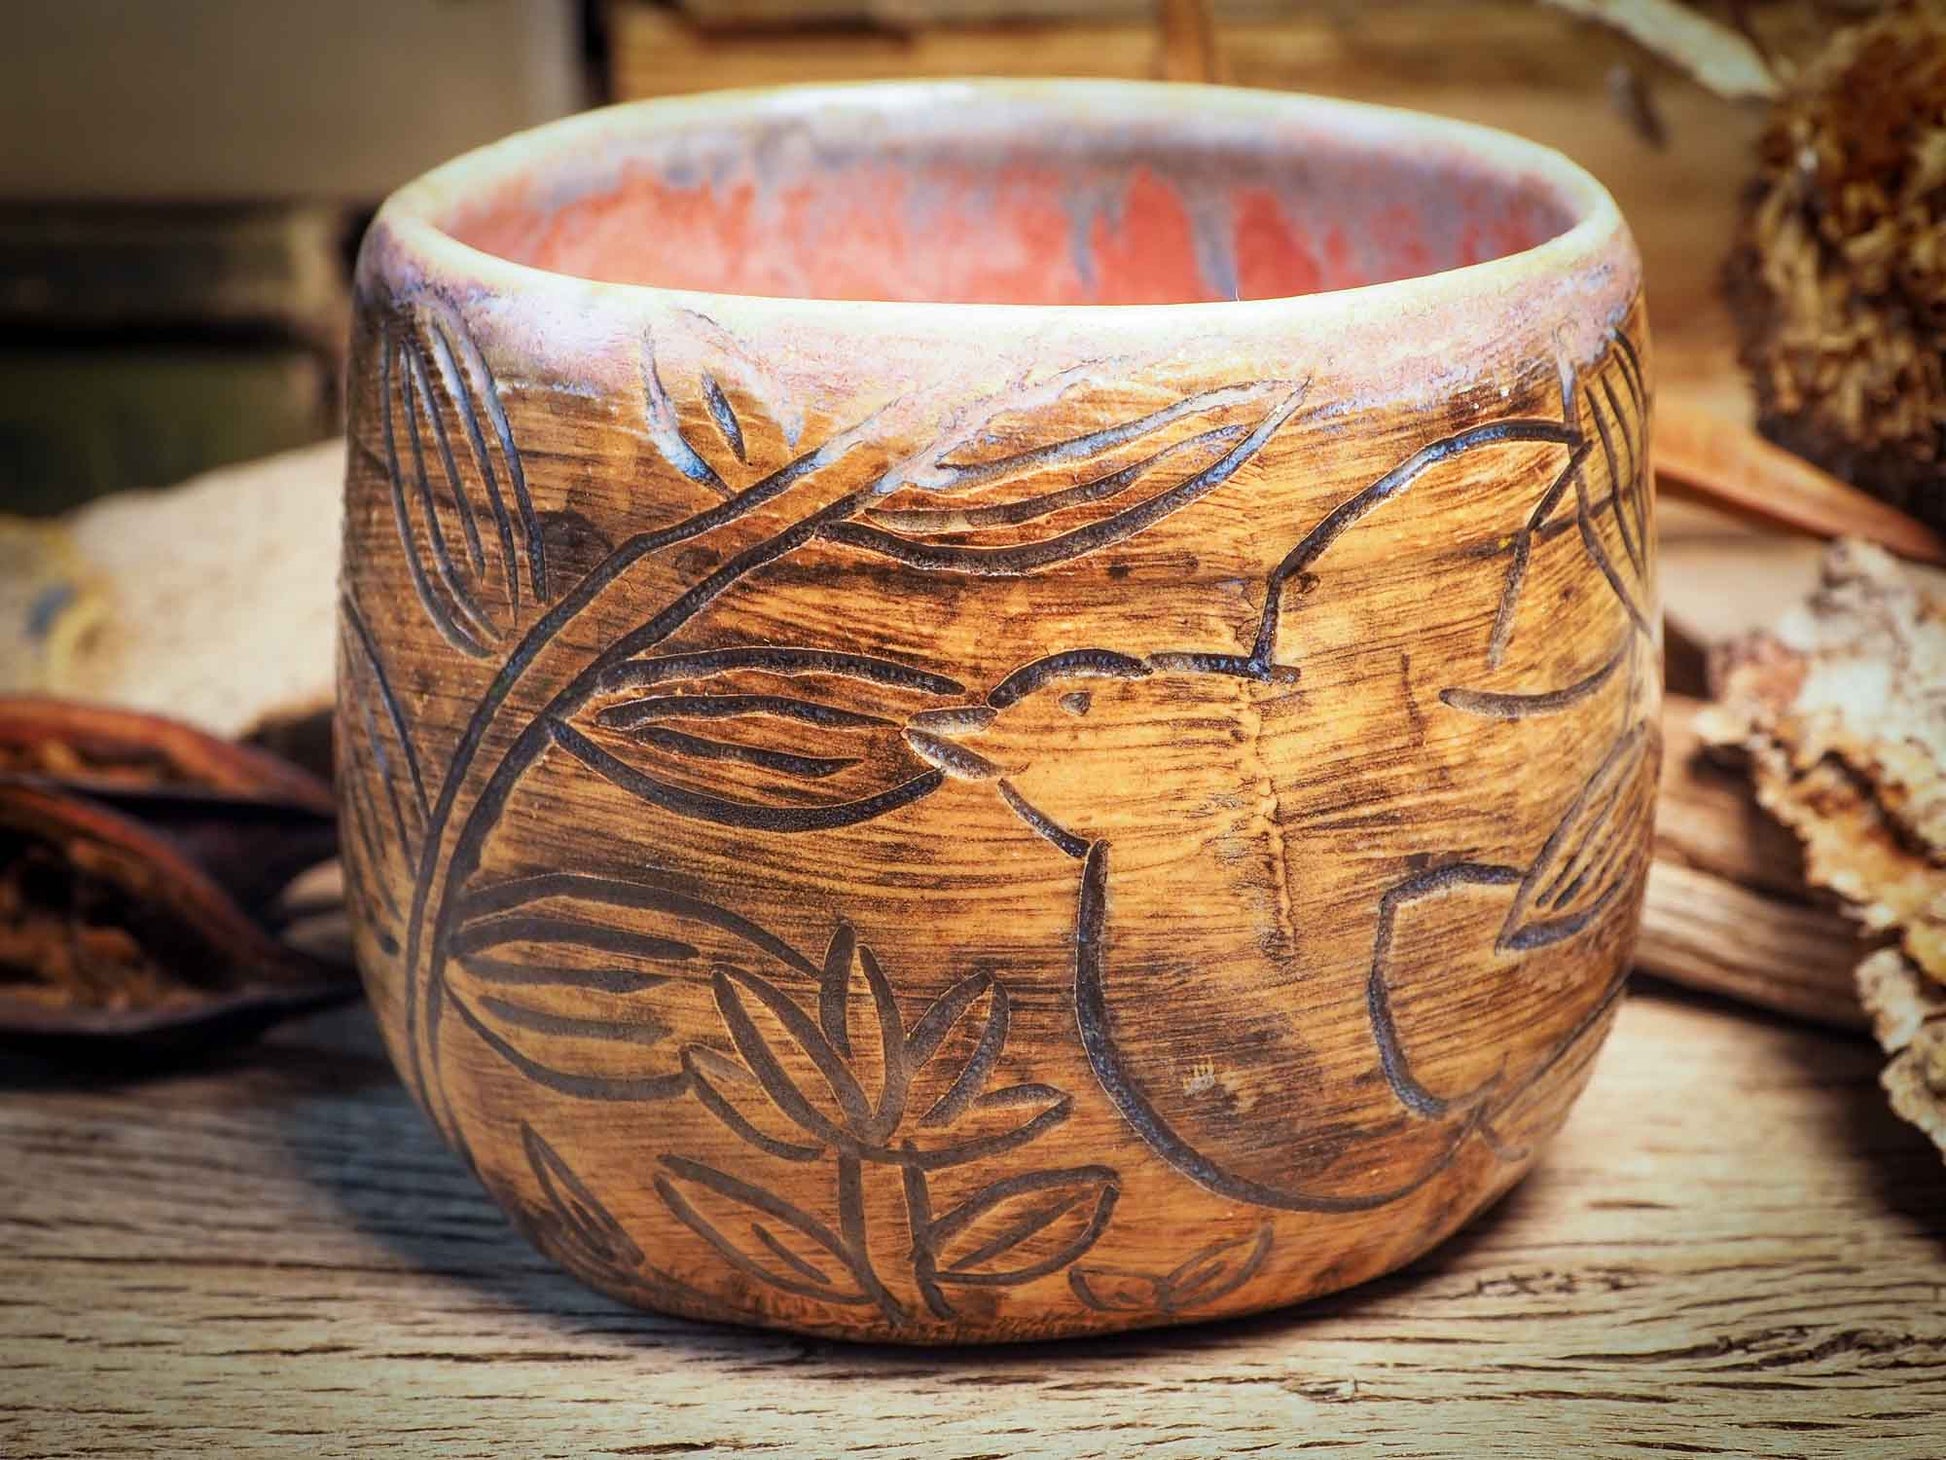 This handmade carved ceramic coffee mug was created by me, Idania Salcido, the artist behind Danita Art, and fired and glazed on my own kiln. The inside is a beautiful combination of pink and blue glazes, swirling and combining inside like cream and coffee. Carved birds fly over a field, free and going far, far away.